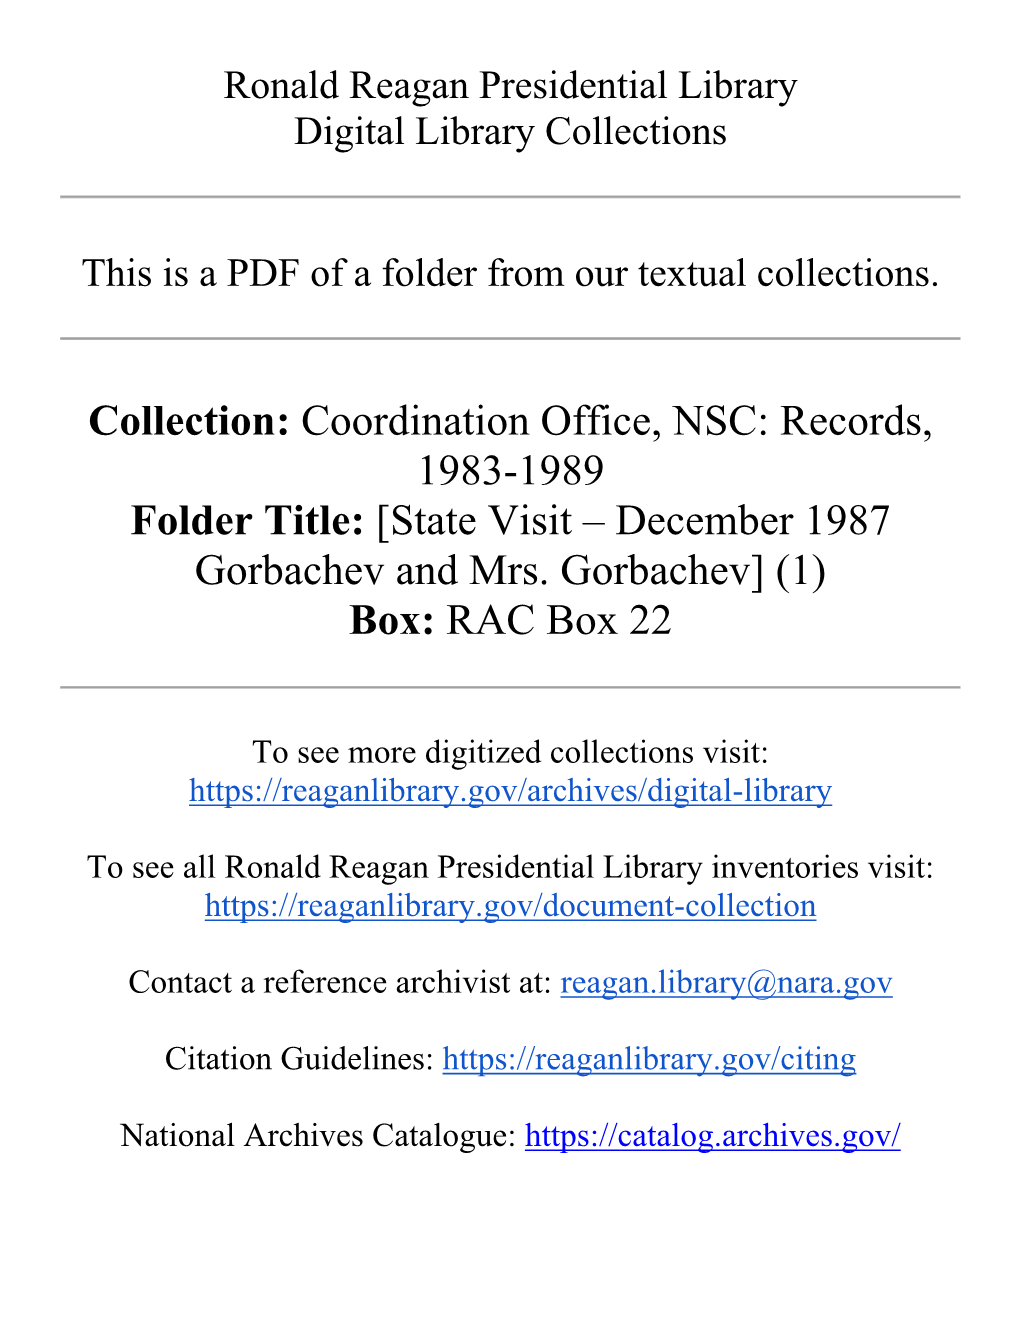 Collection: Coordination Office, NSC: Records, 1983-1989 Folder Title: [State Visit – December 1987 Gorbachev and Mrs